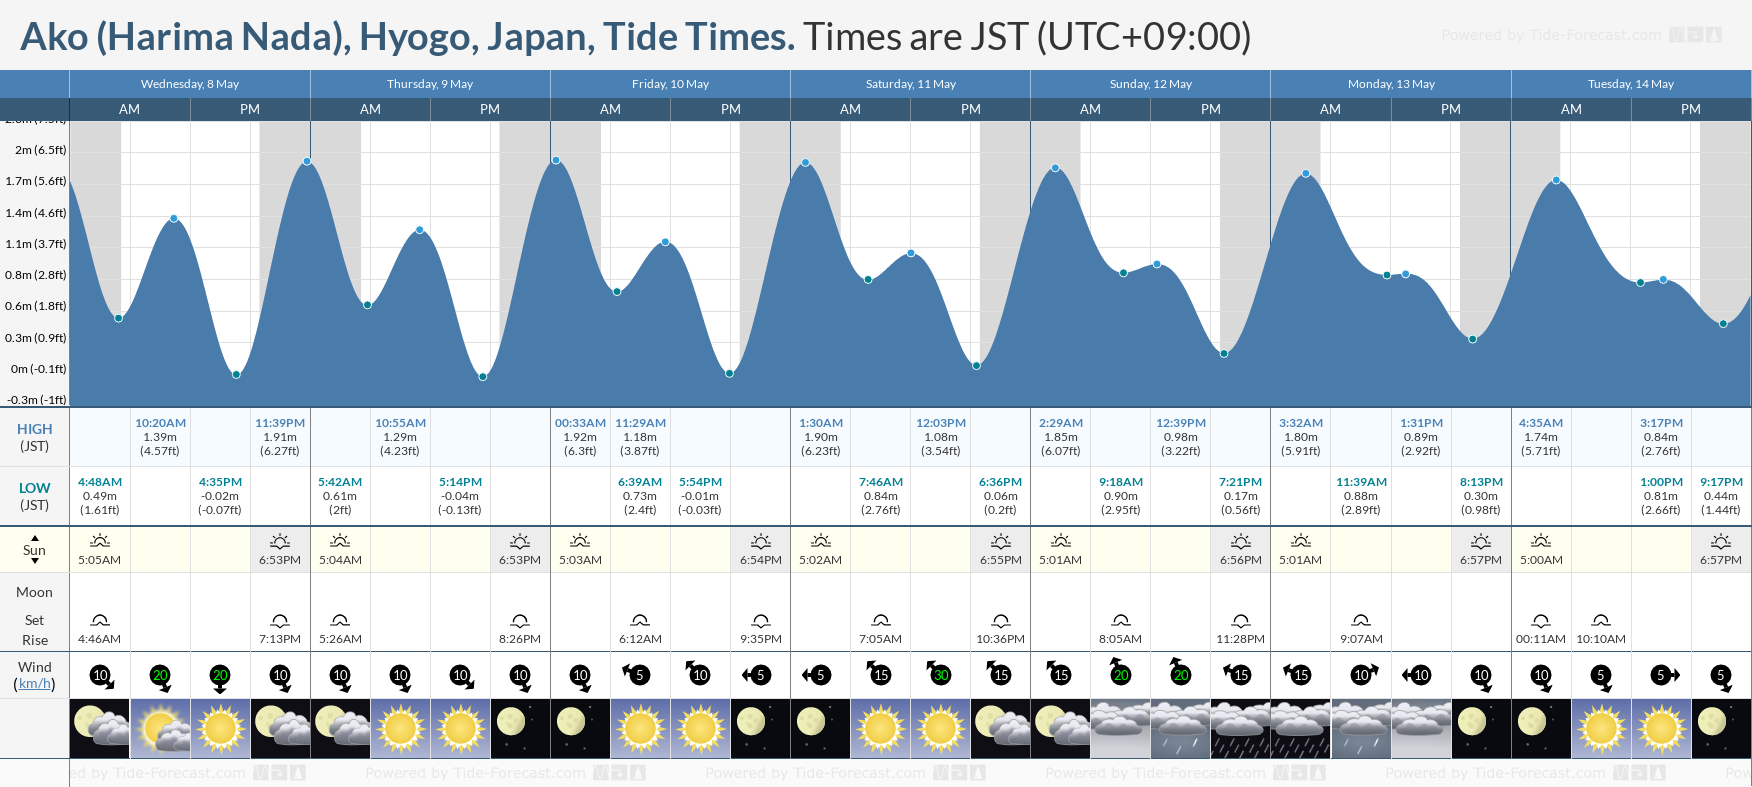 Ako (Harima Nada), Hyogo, Japan Tide Chart including high and low tide tide times for the next 7 days